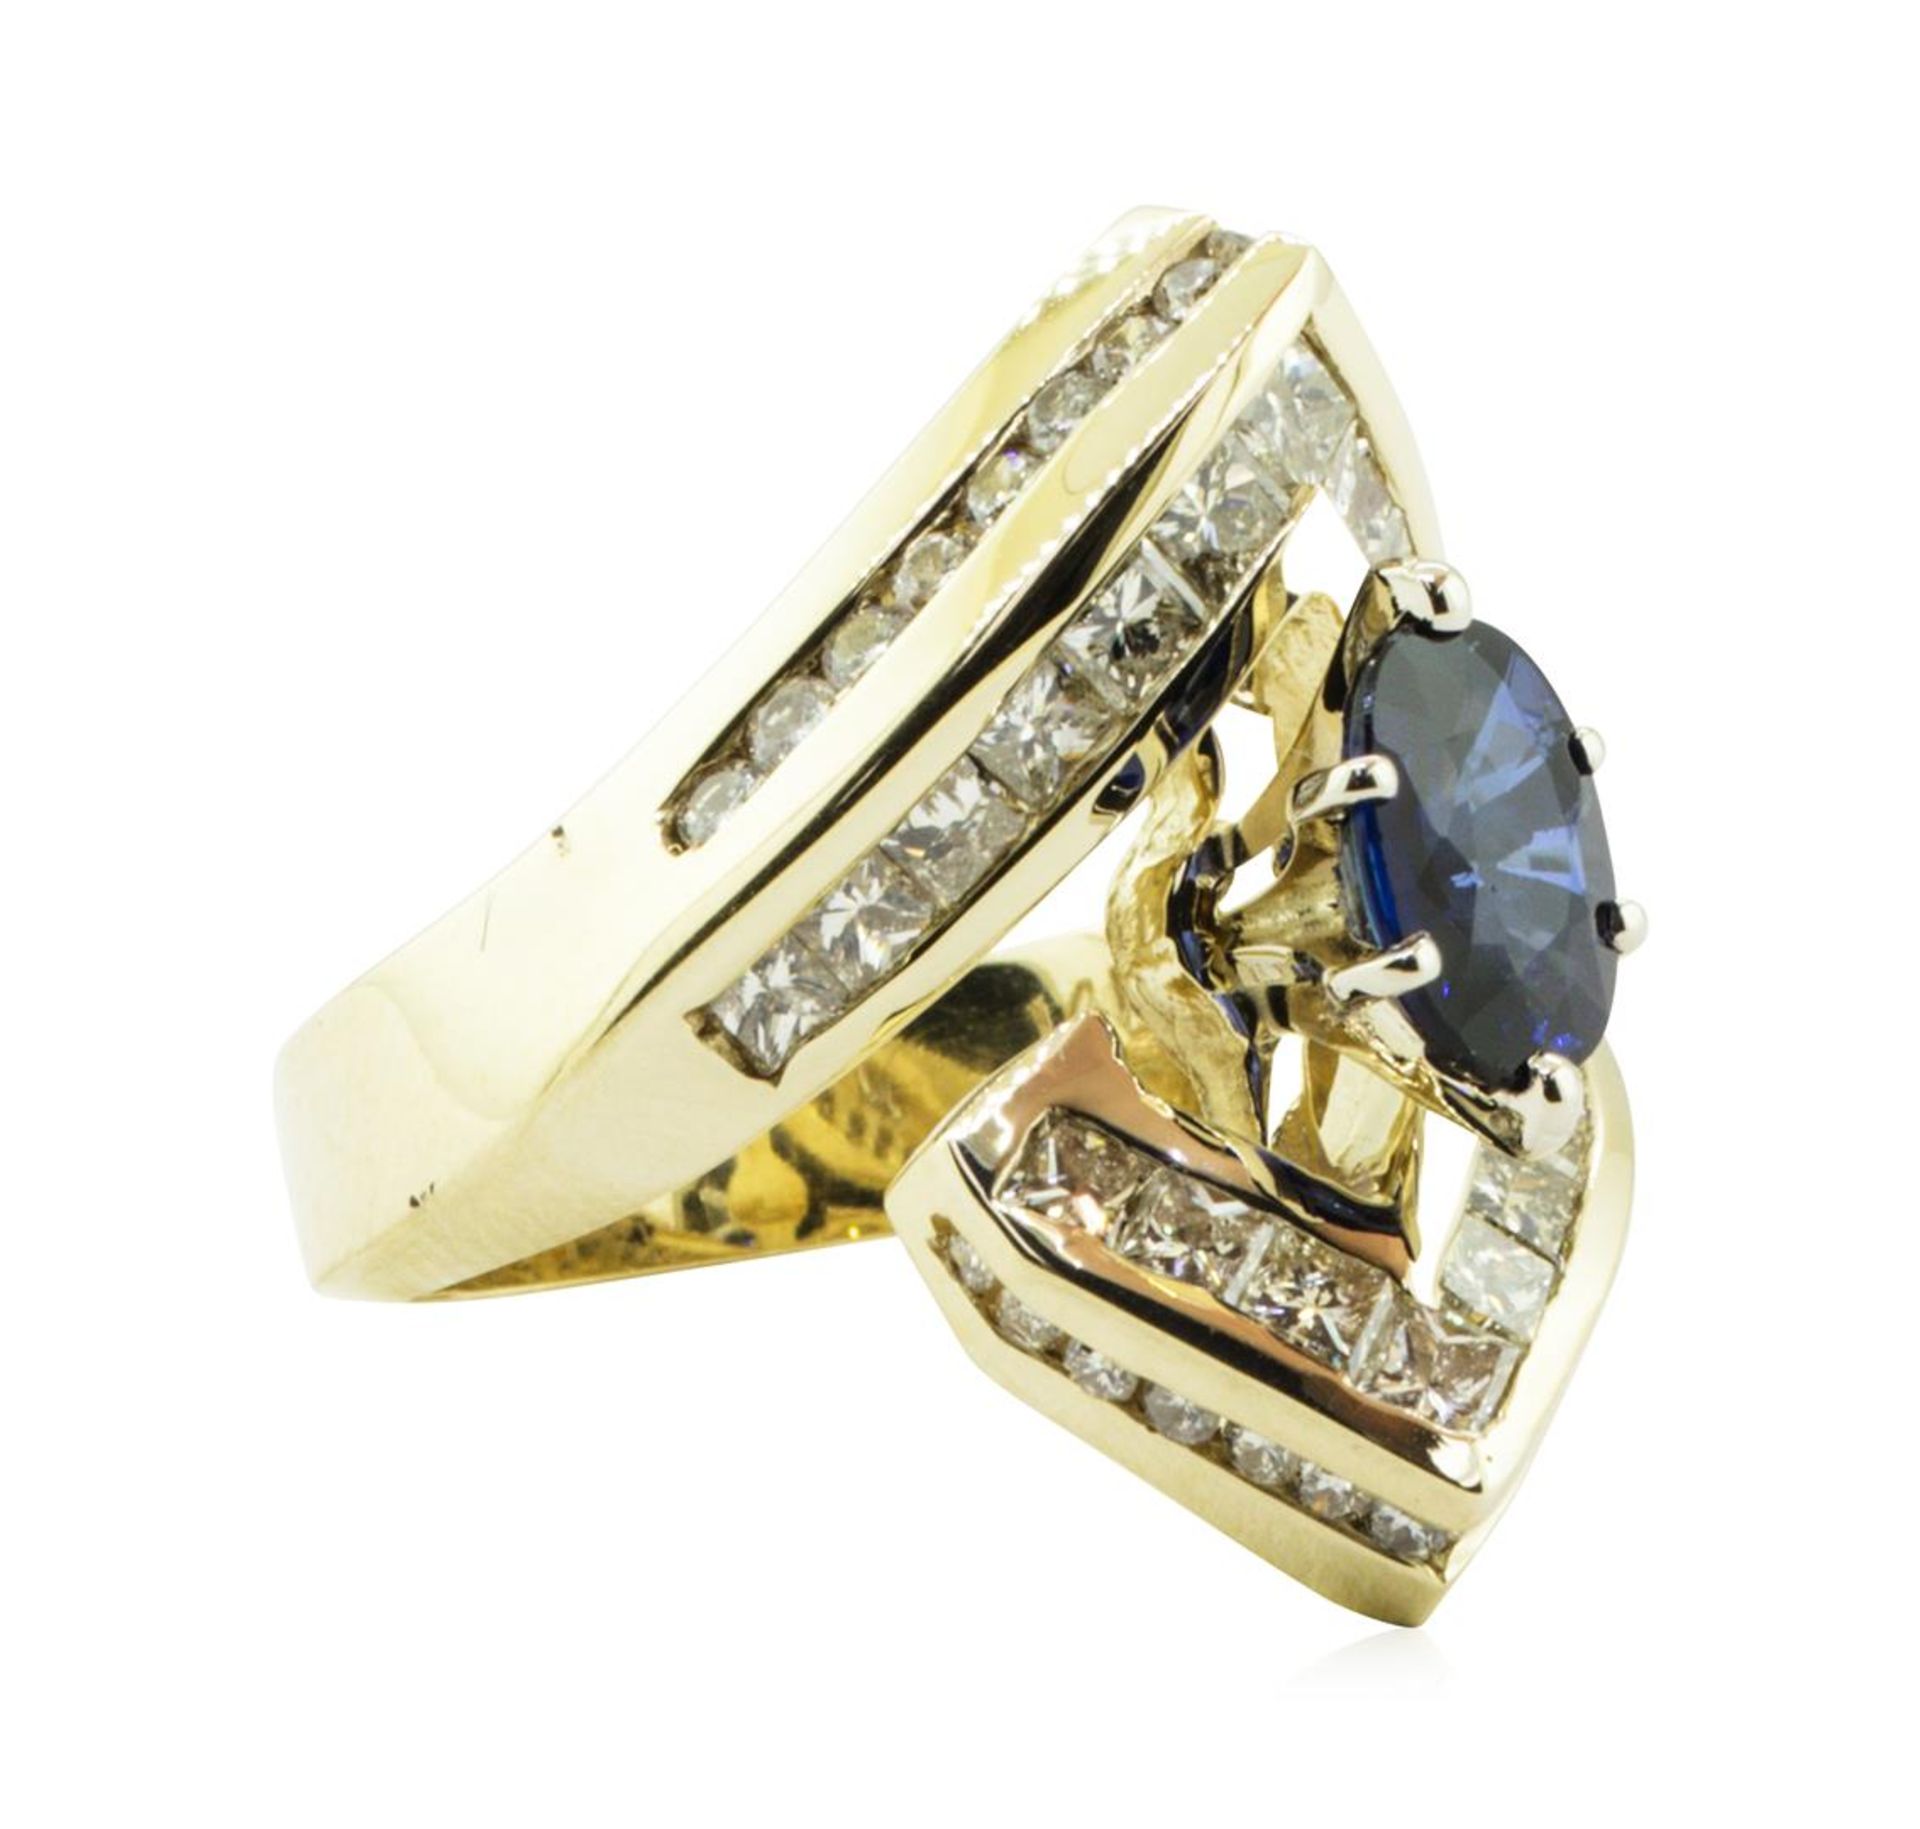 3.16 ctw Oval Brilliant Blue Sapphire And Diamond Ring - 14KT Yellow Gold